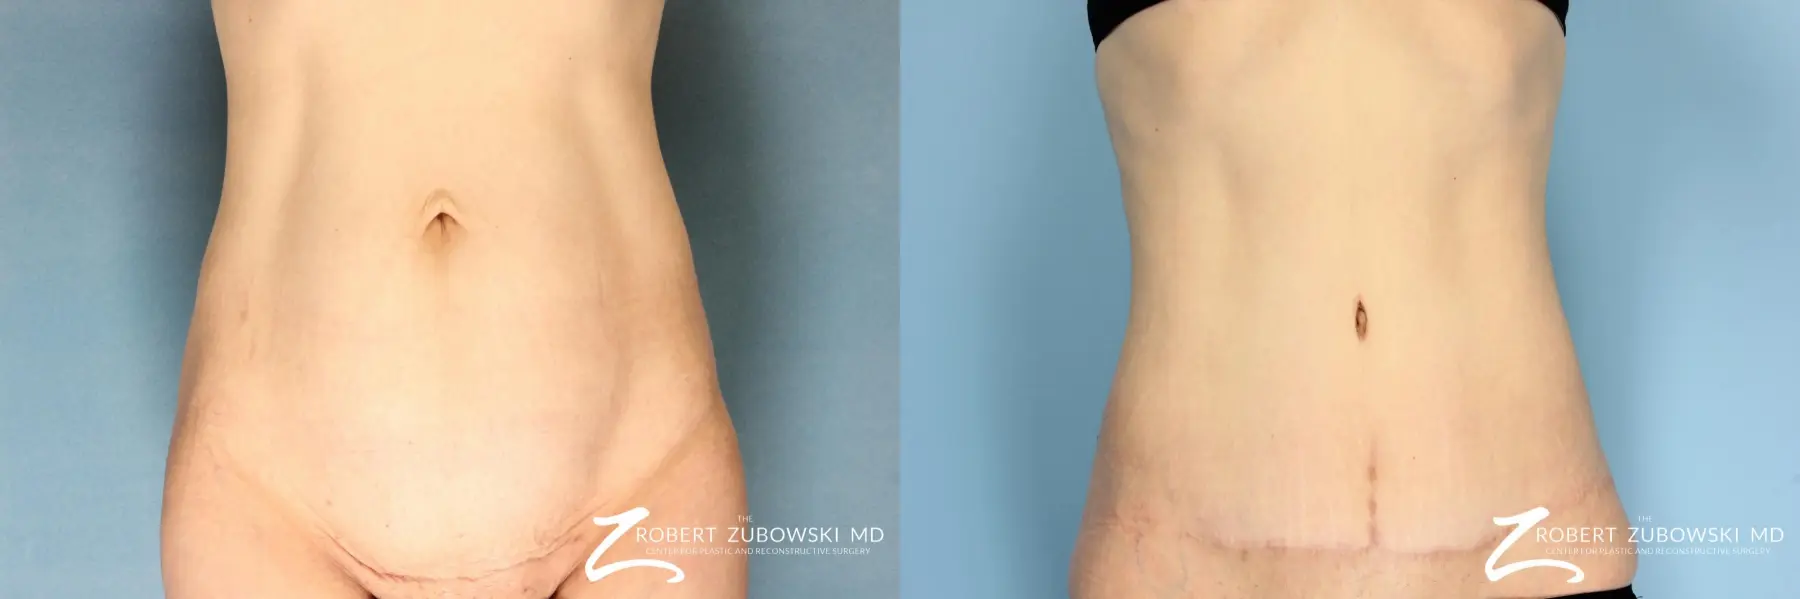 Tummy Tuck Before & After Gallery: Patient 3